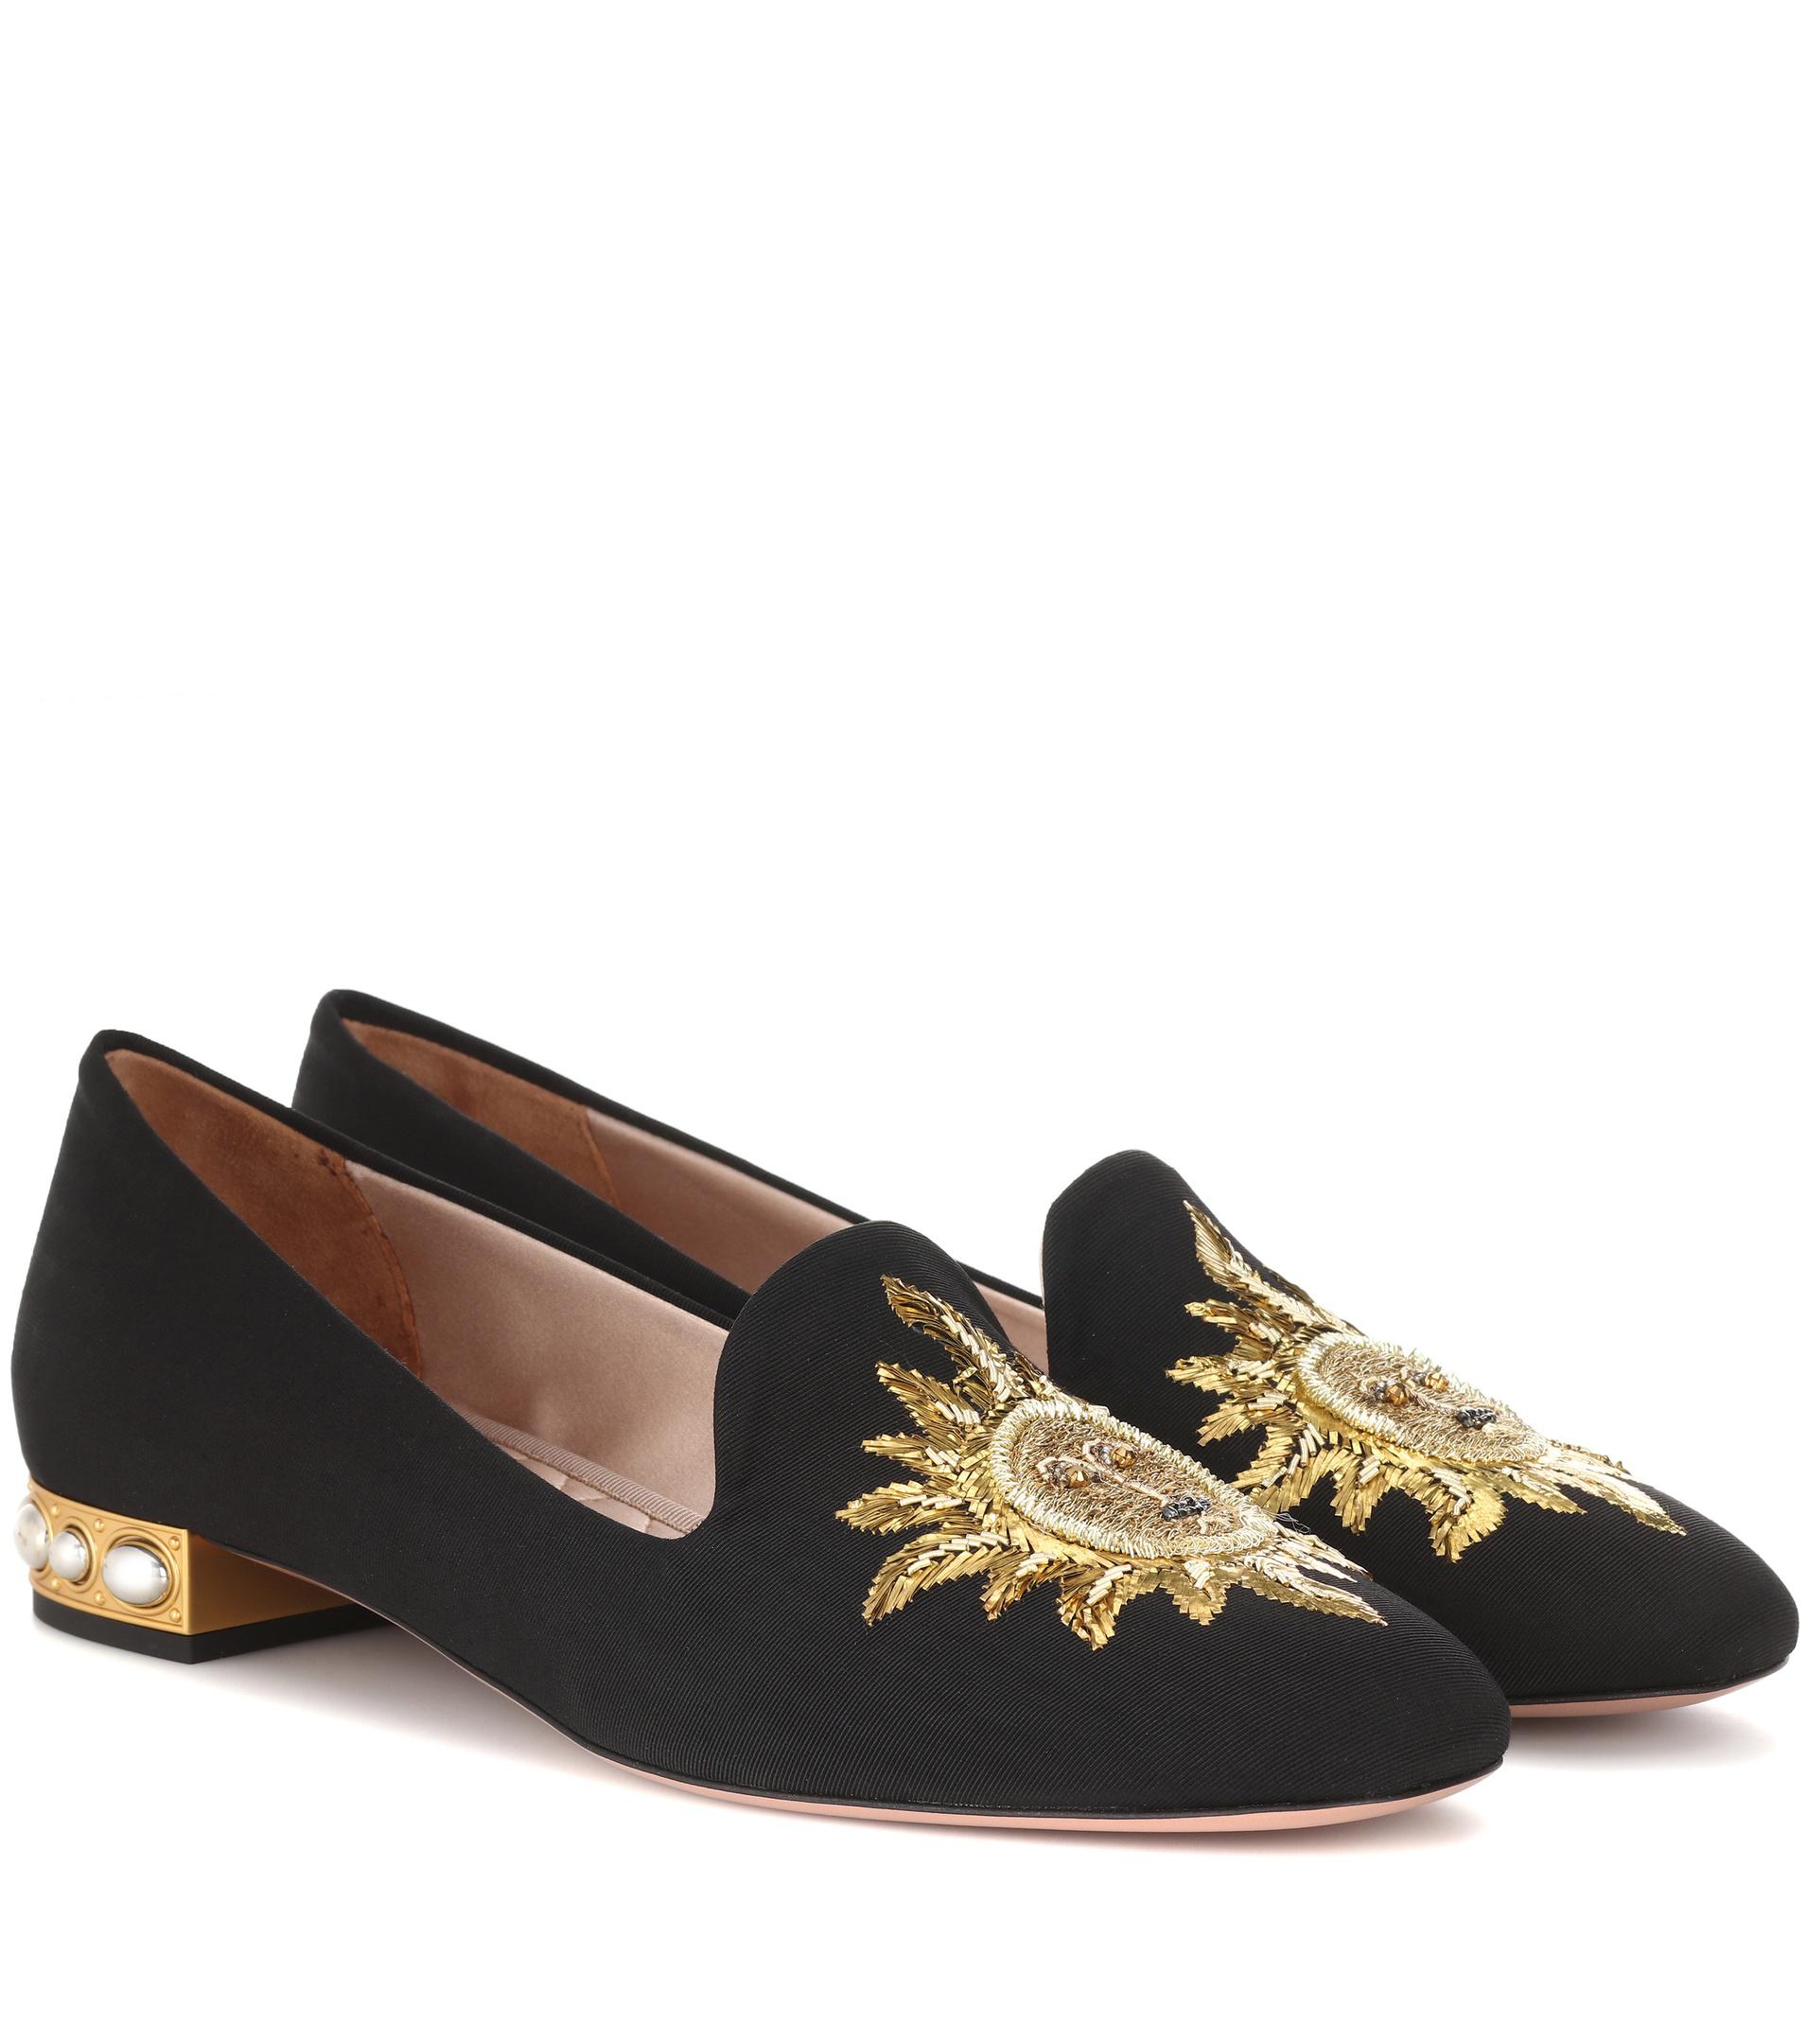 Aquazzura Embroidered Moire Loafers in Black - Lyst